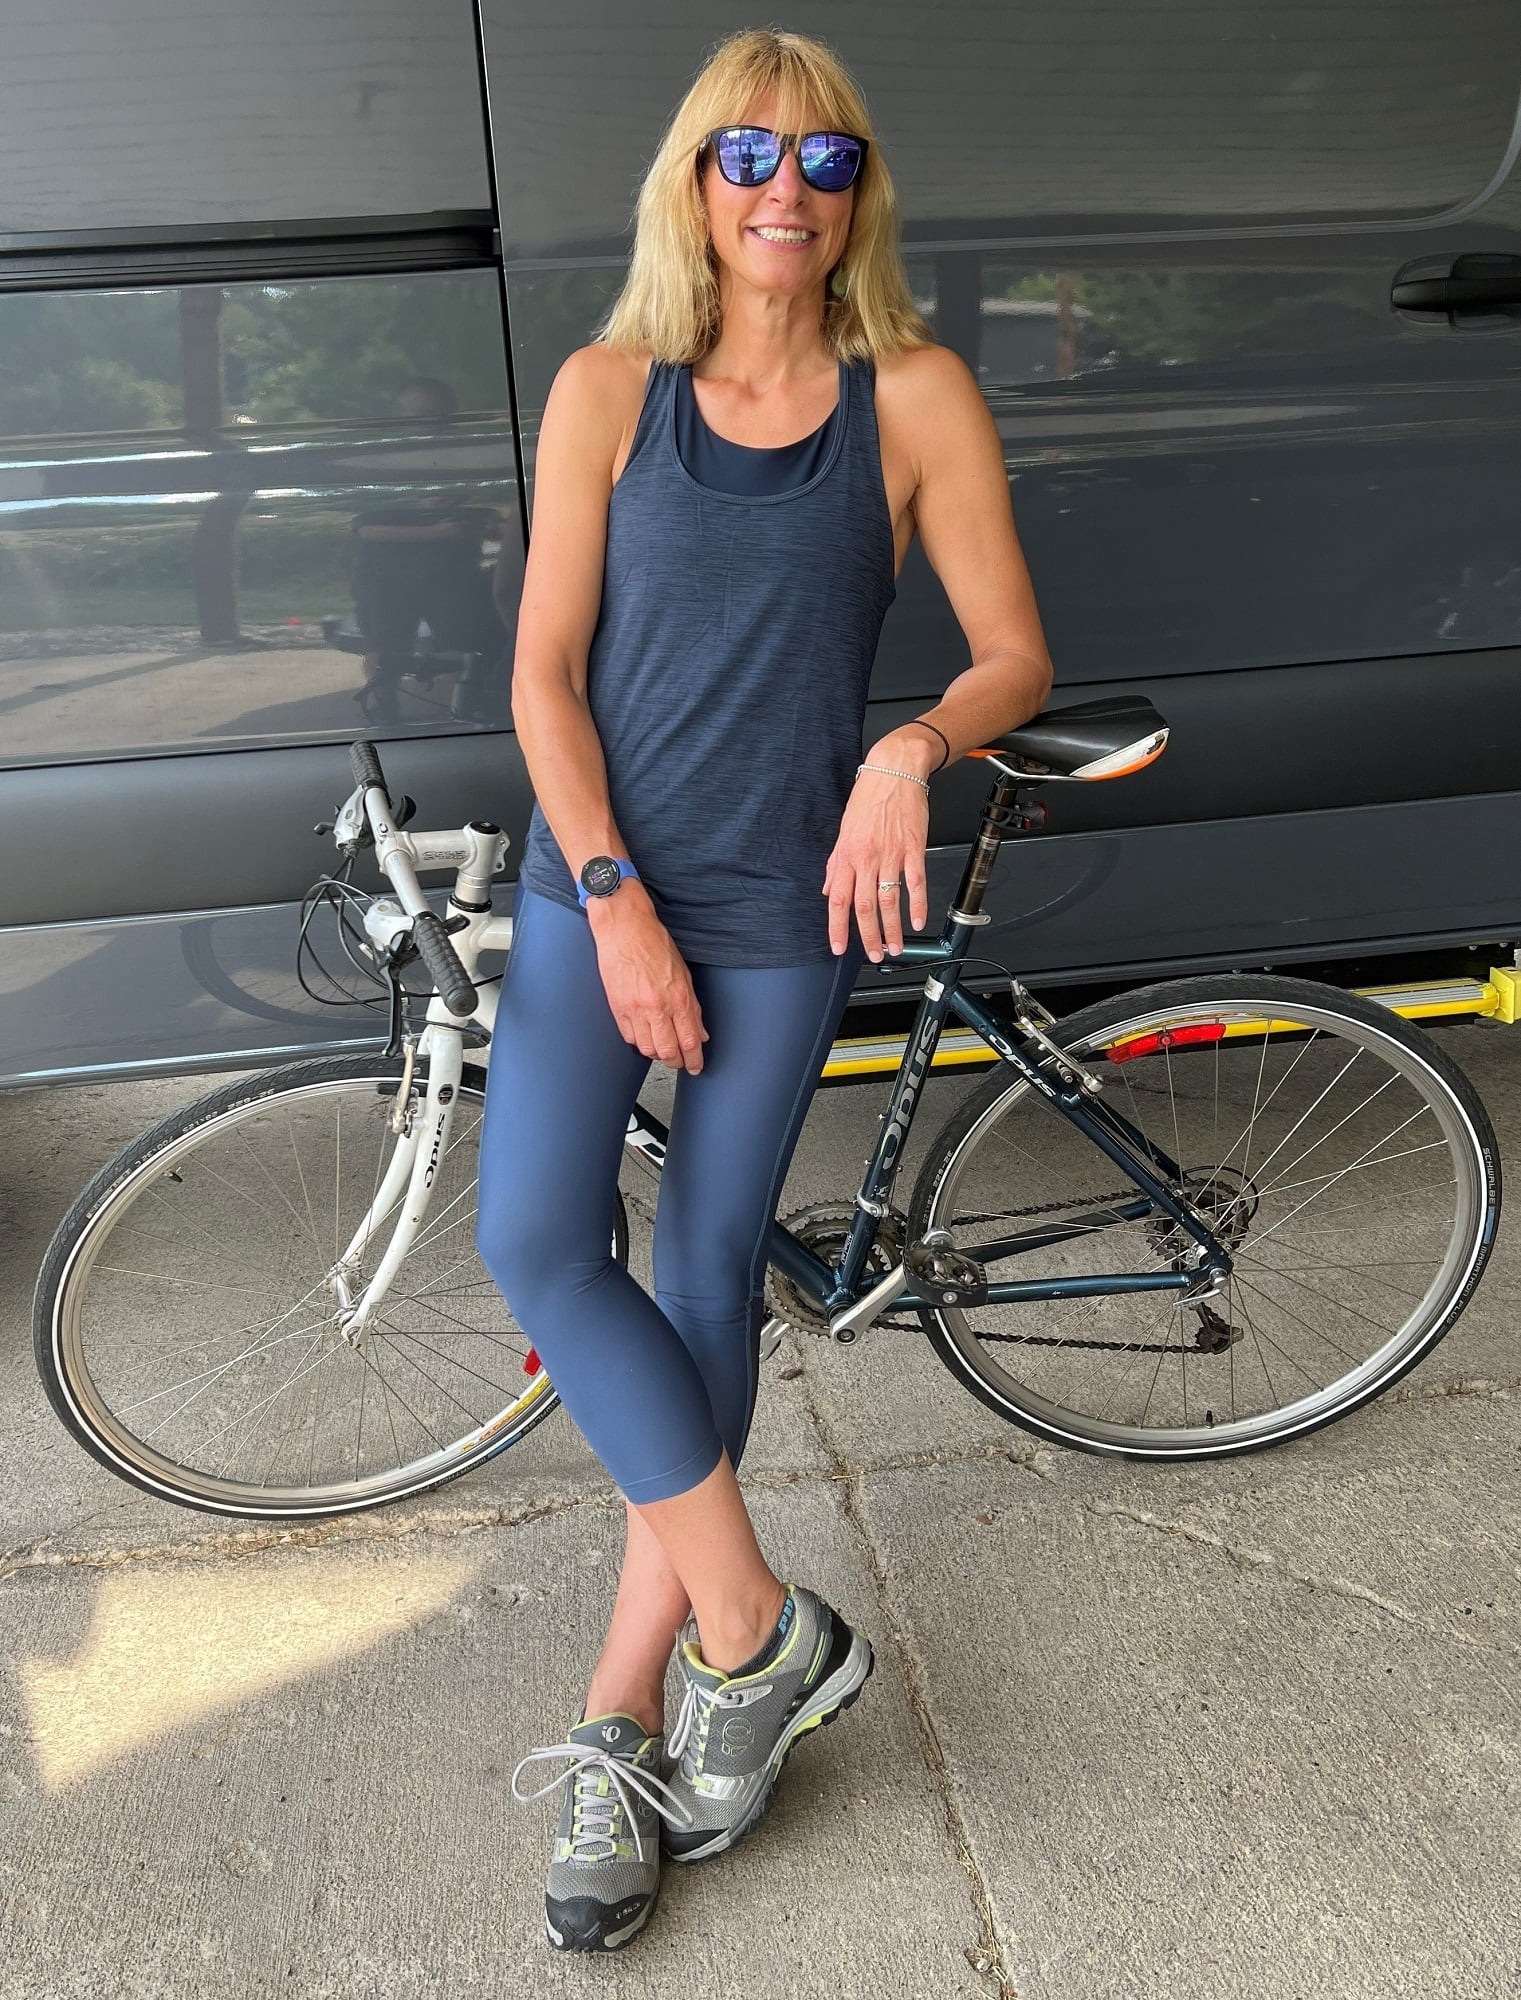 Rosslander/RDKB Finance Manager Swaps Calculator for Cycling in Epic Cancer Fundraiser